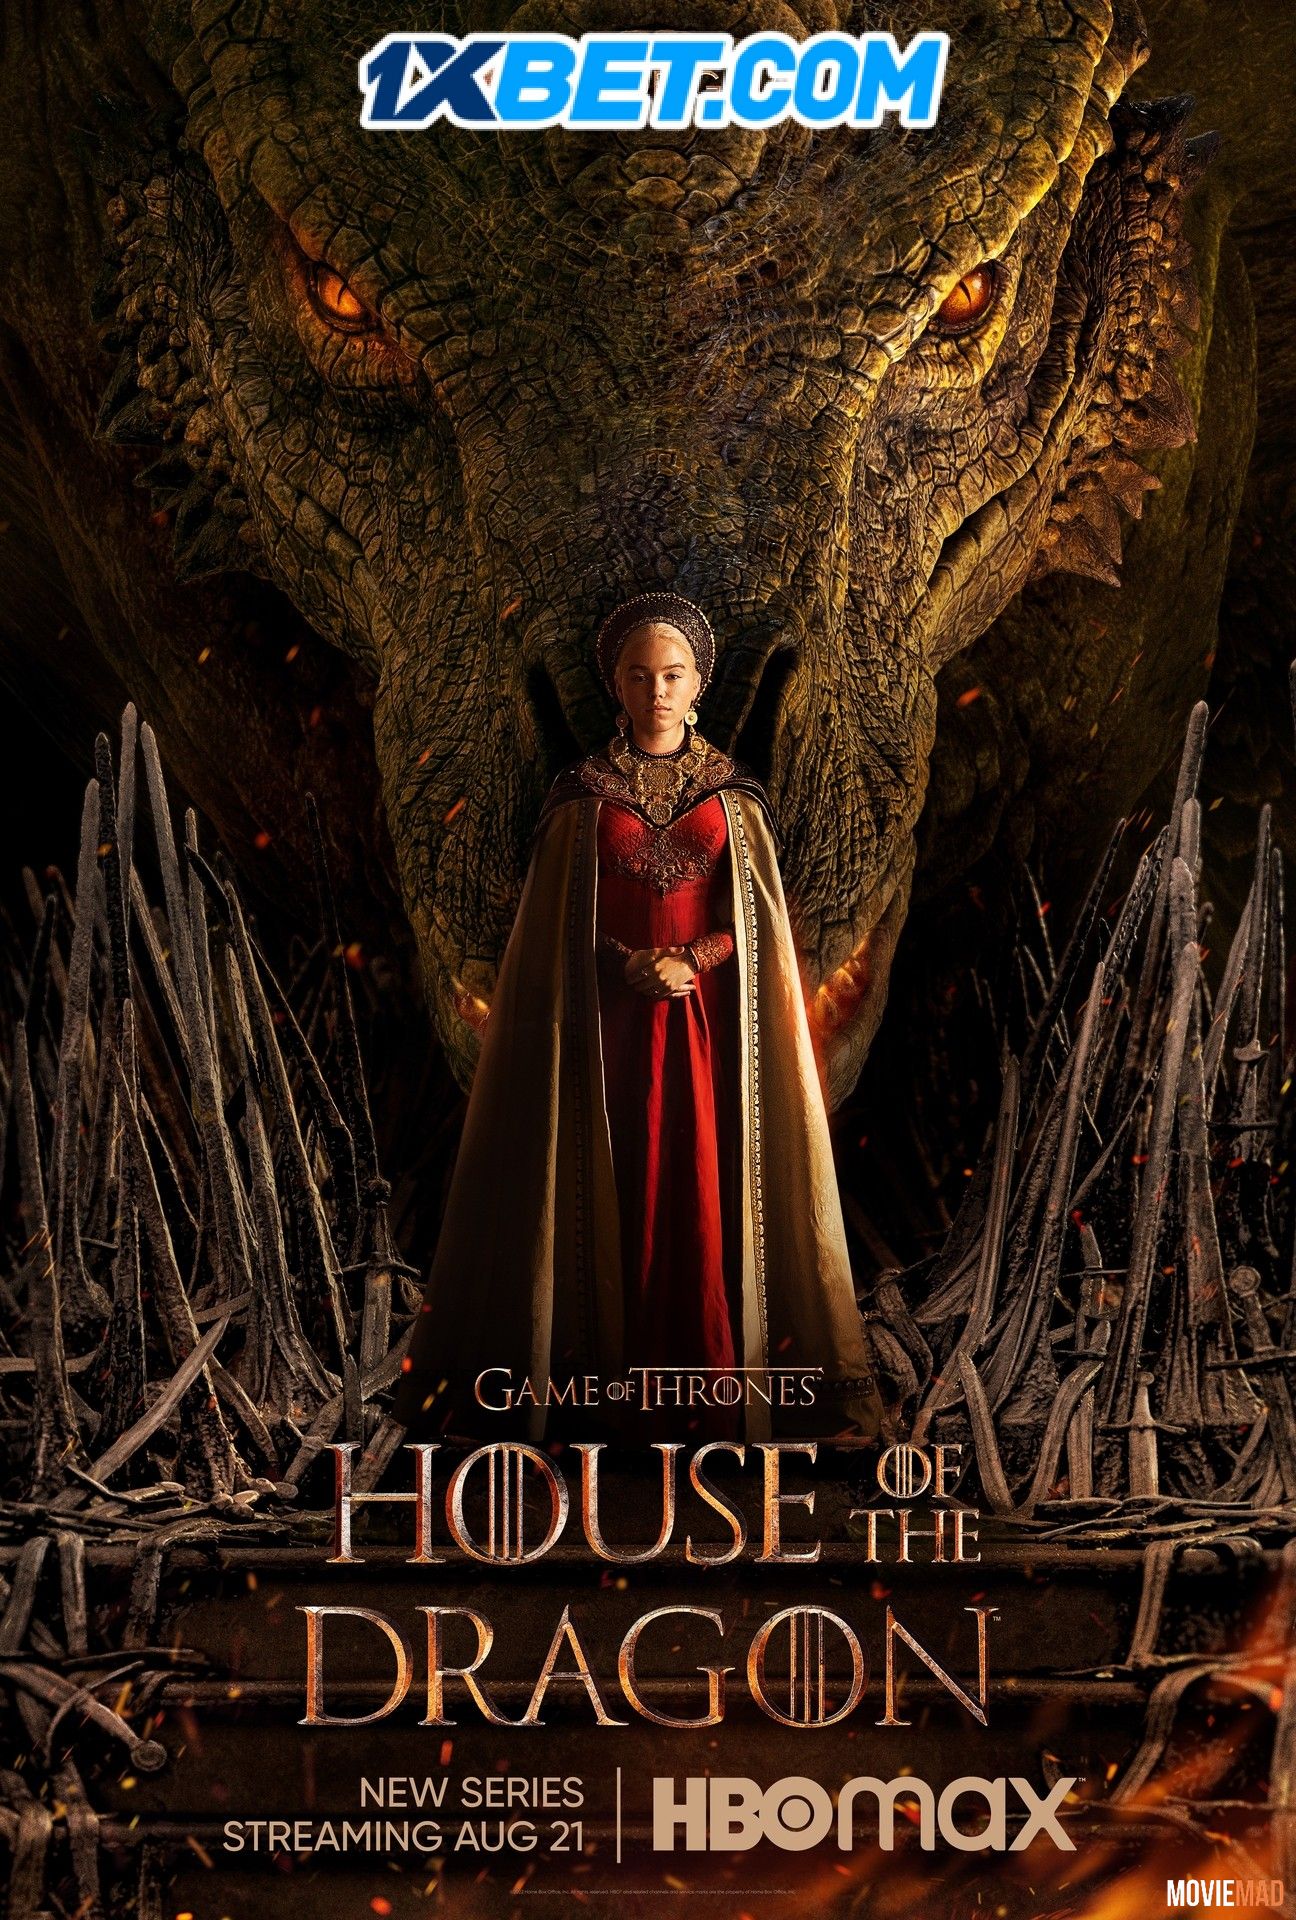 House Of The Dragon S01E03 (2022) Hindi (Voice Over) Dubbed HBOMAX HDRip 1080p 720p 480p